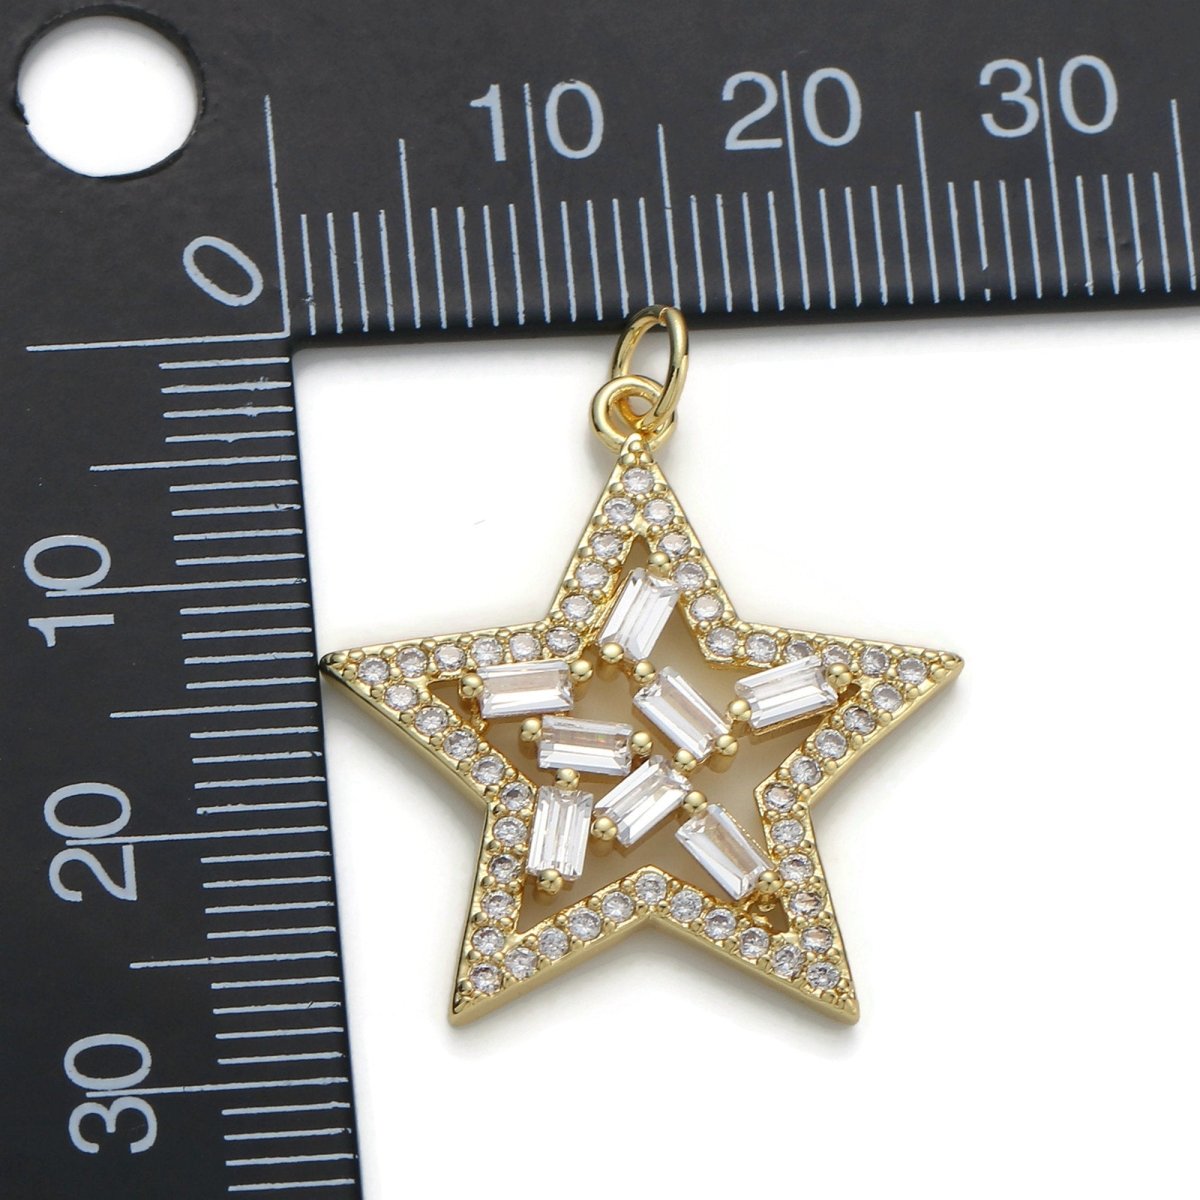 24k Gold Filled Micro Pave Star Charm, Cubic Zirconia Star Pendant Charm, Gold Filled Charm, For DIY Jewelry D-041 - DLUXCA